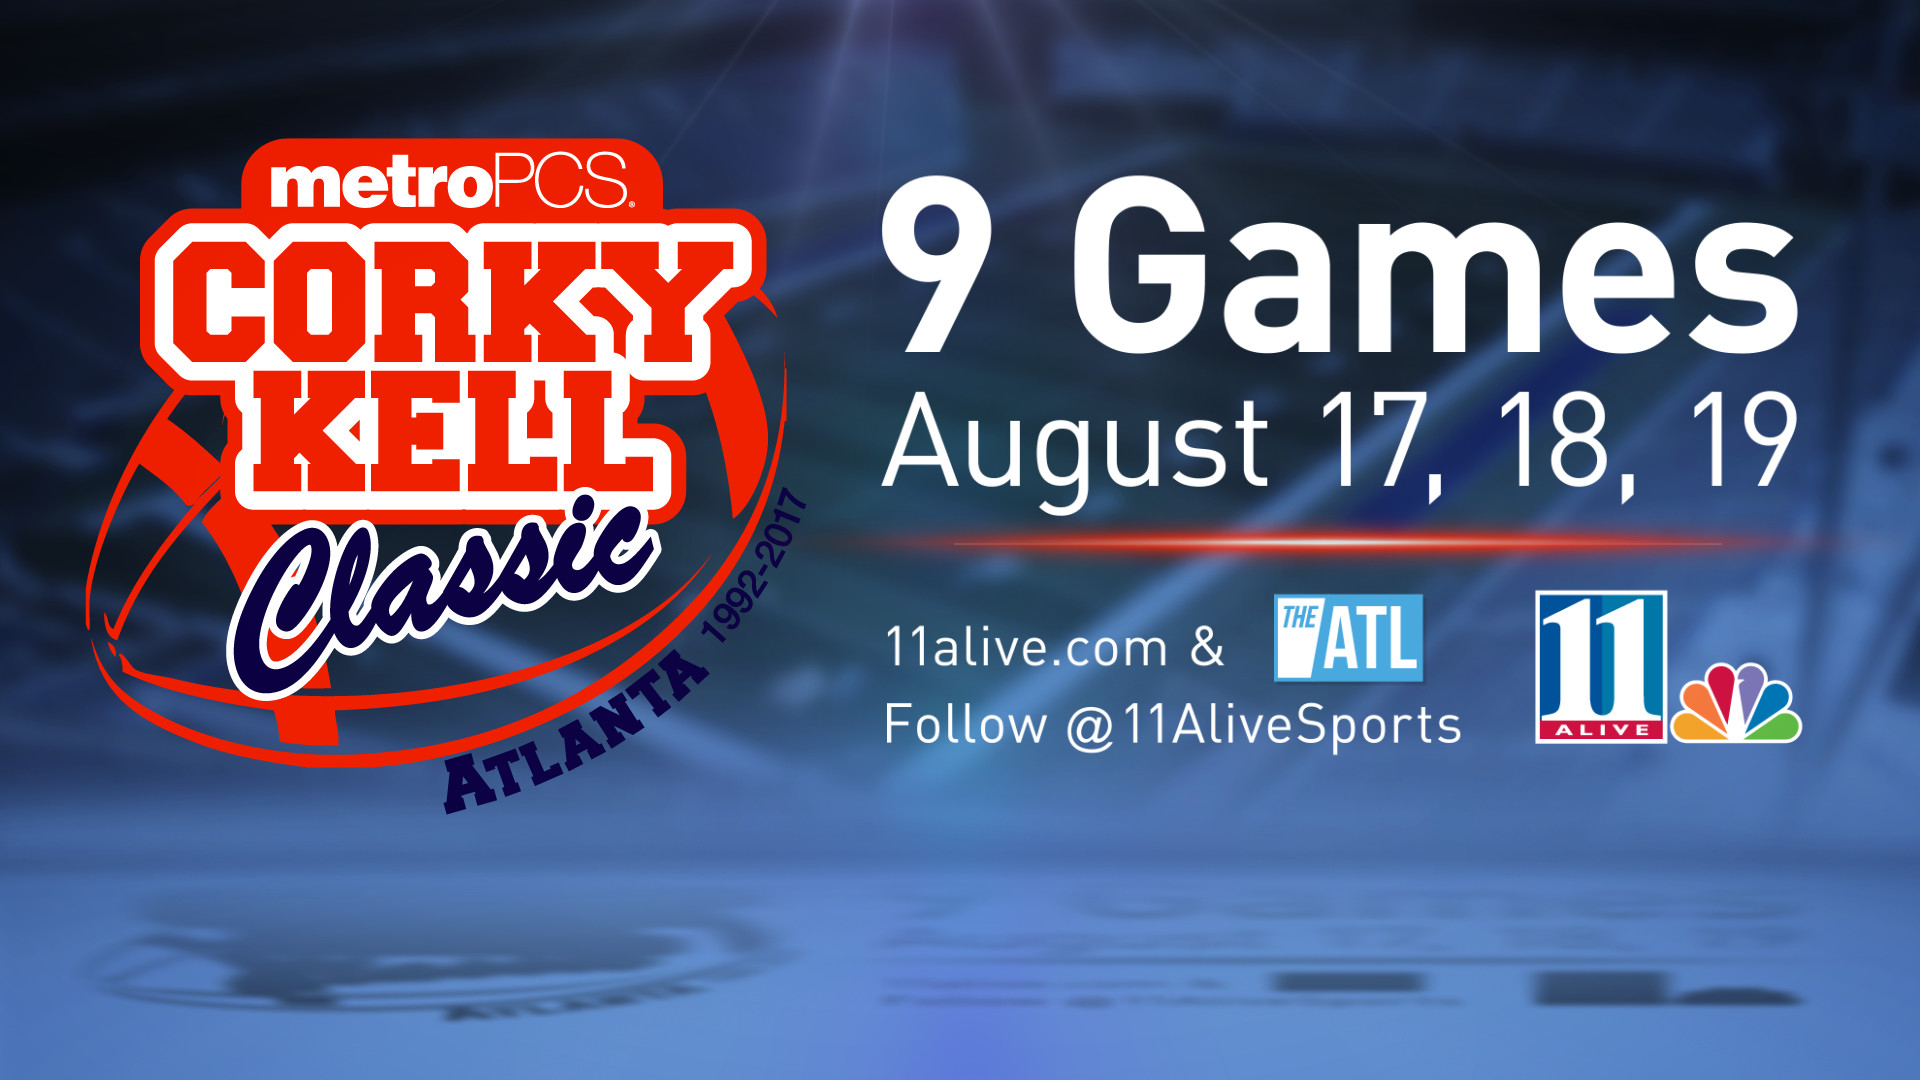 How to watch all nine games of the 2017 Corky Kell Classic 11alive.com